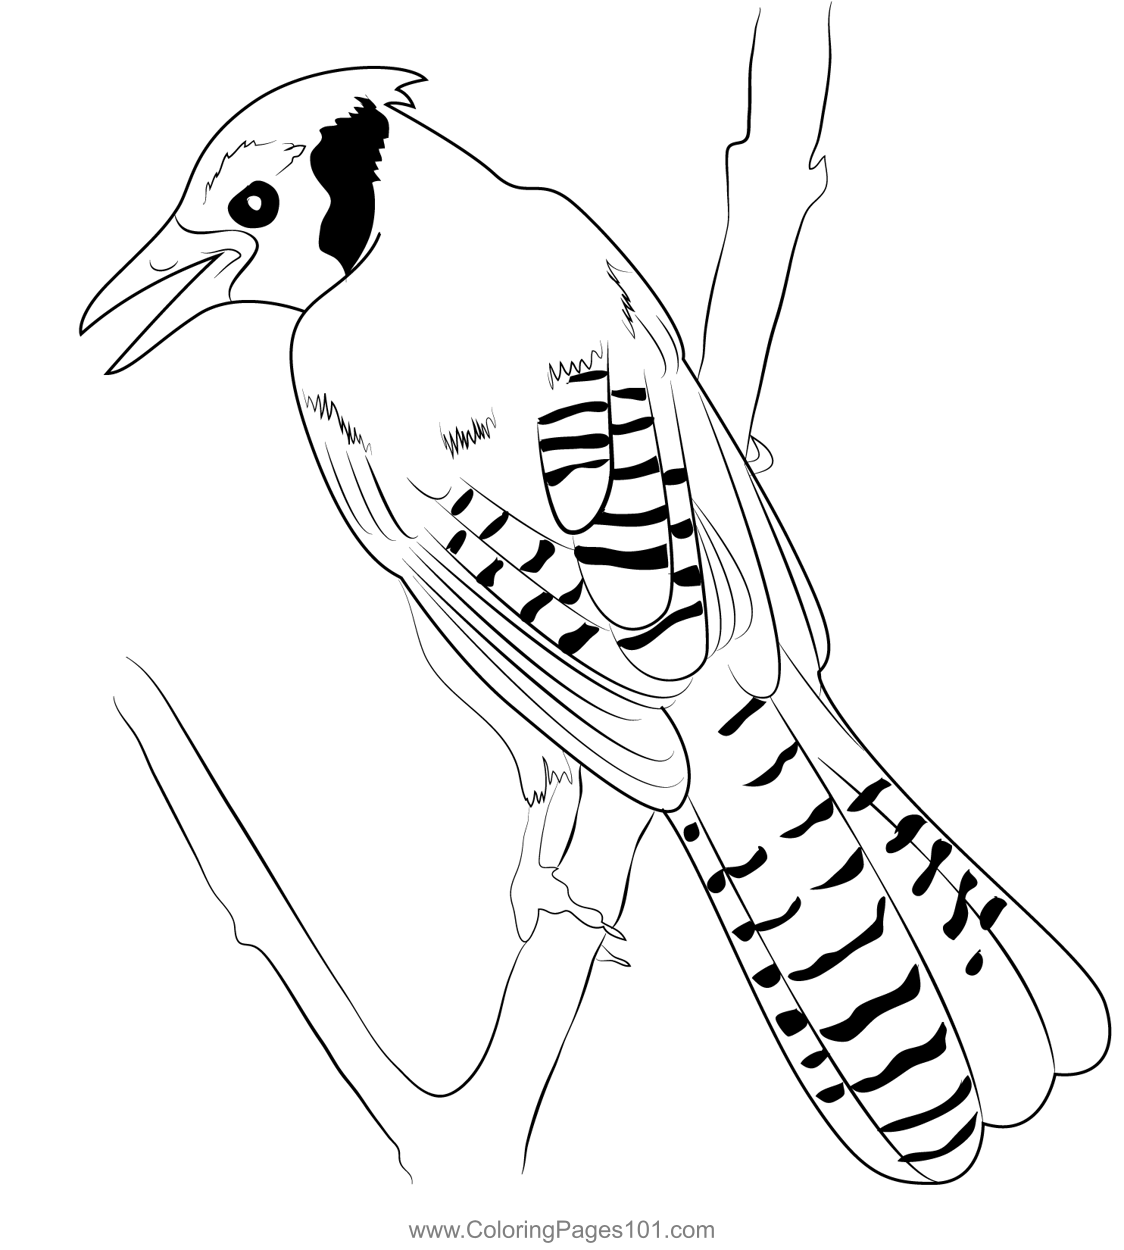 Bluejay In Tree Coloring Page for Kids - Free Crows Printable Coloring Pages  Online for Kids - ColoringPages101.com | Coloring Pages for Kids